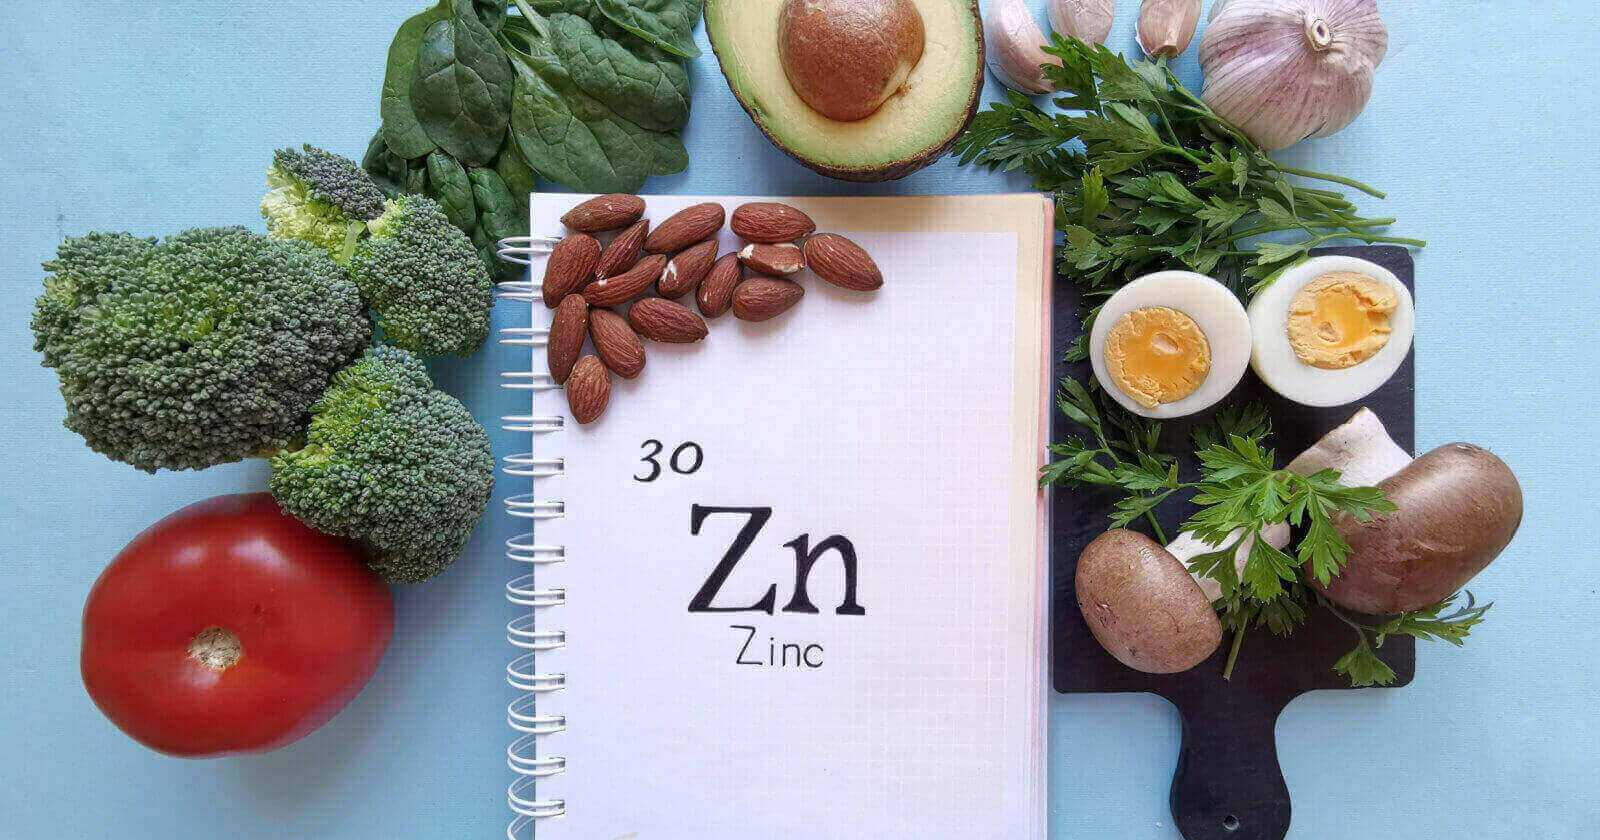 The benefits of zinc for immune function and wound healing
